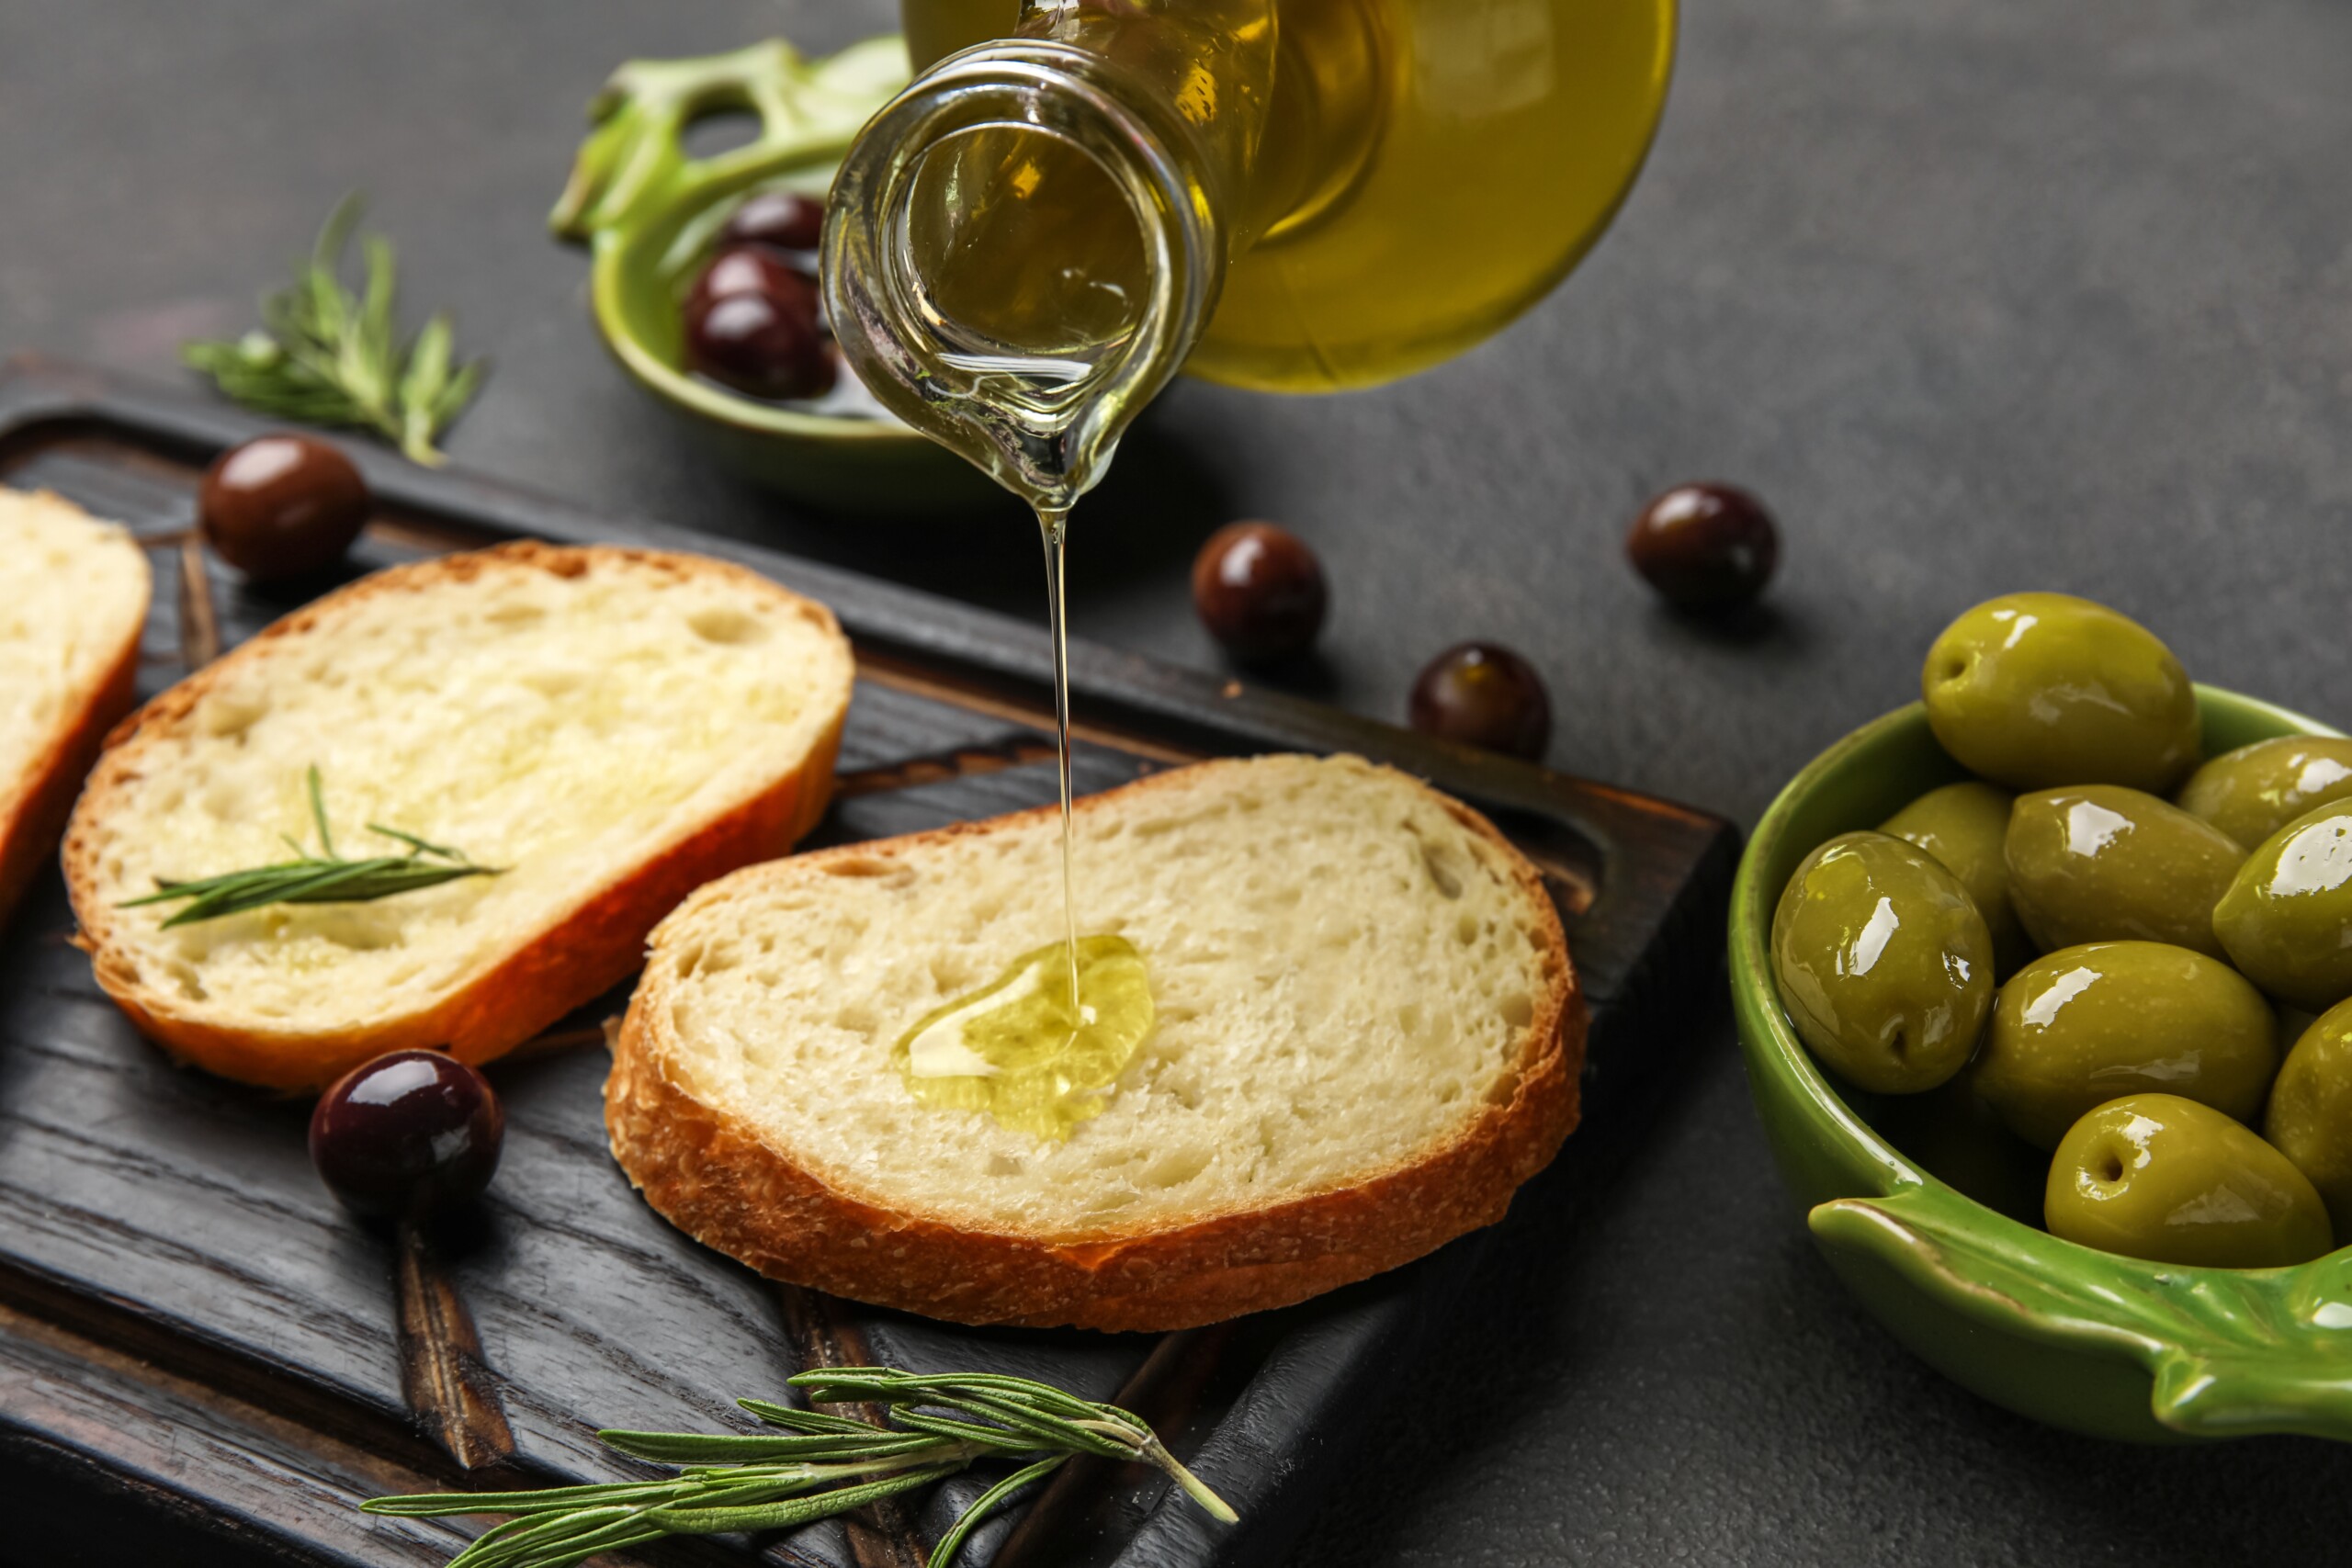 Pouring,Of,Olive,Oil,Onto,Fresh,Bread,On,Dark,Background,